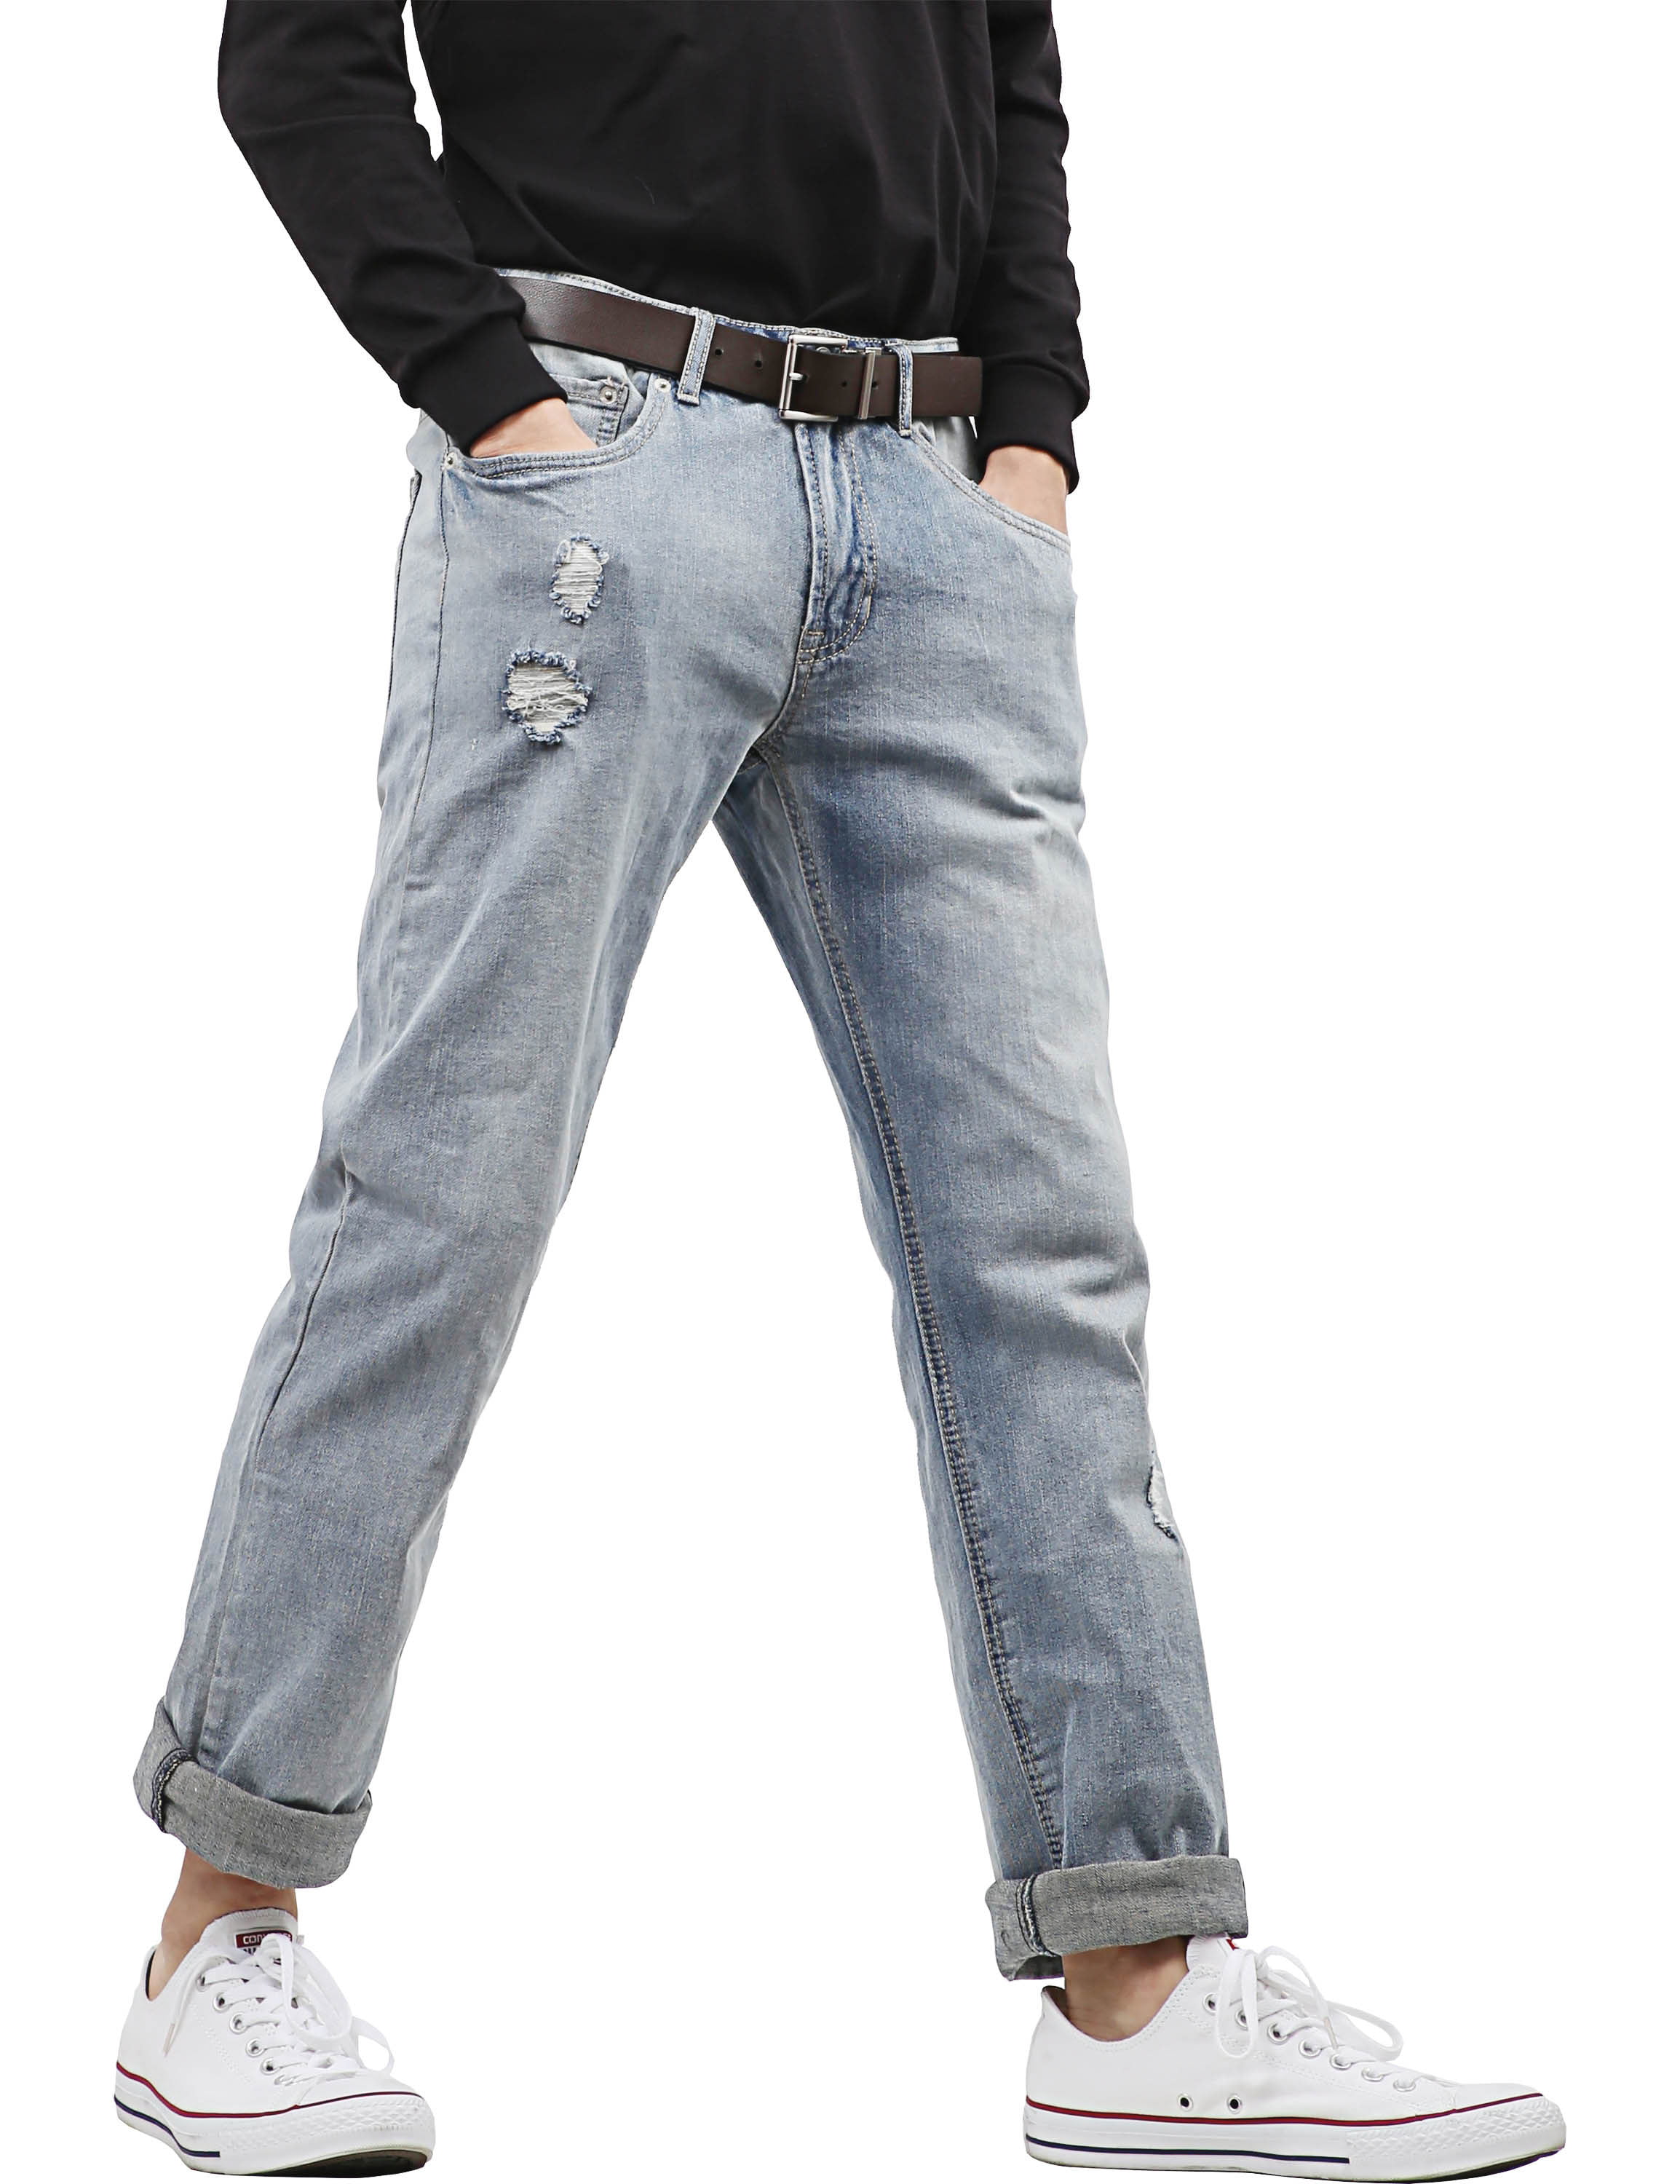 mens fashion jeans rolled